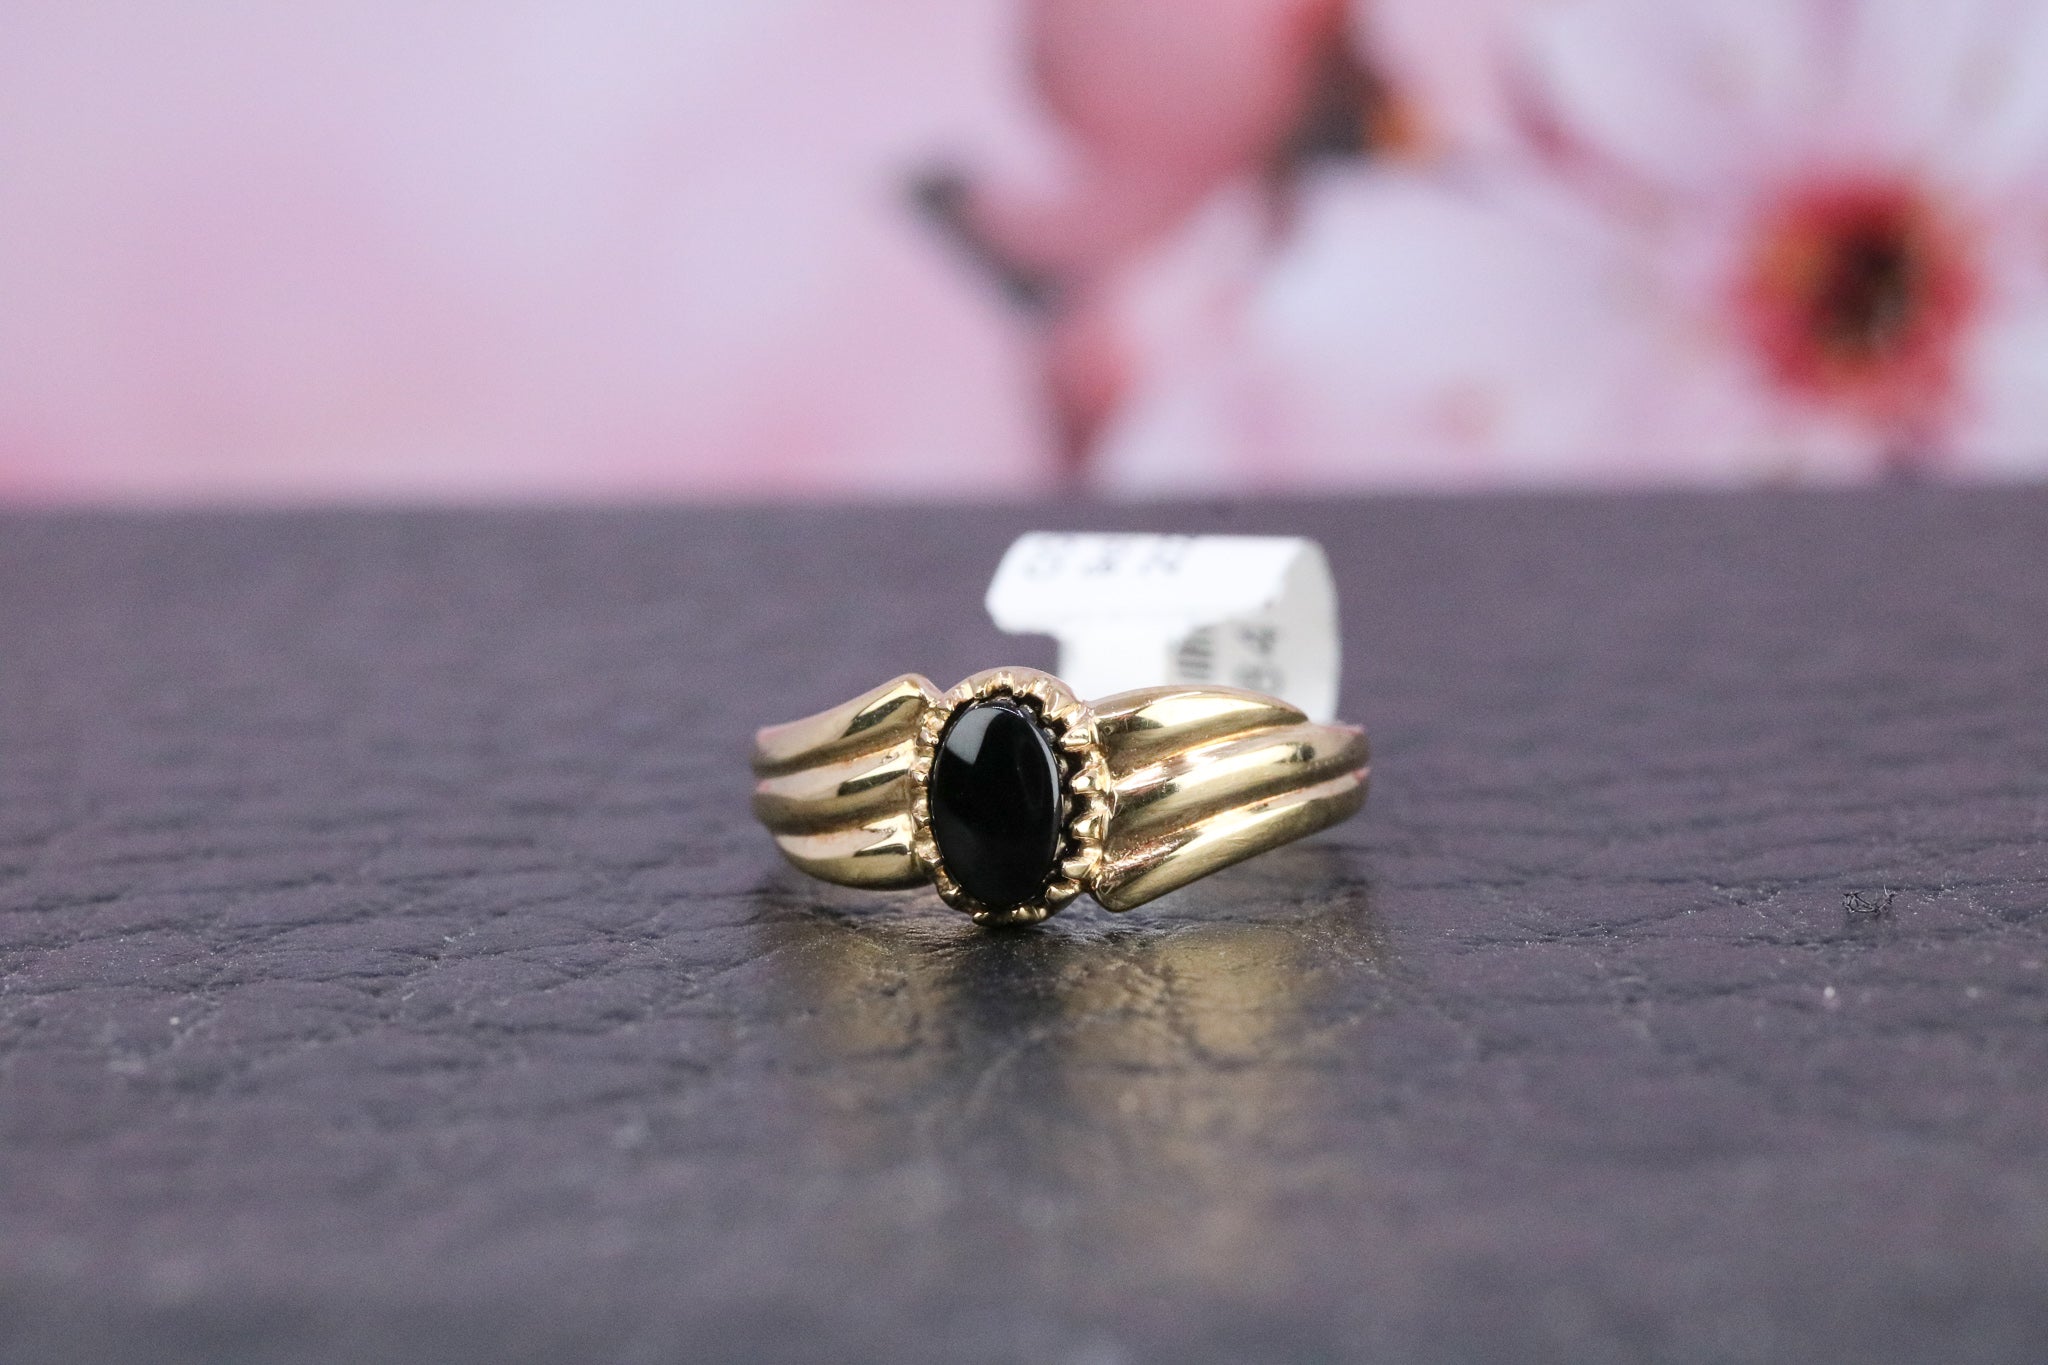 9ct Gold Onyx Ring - CO1384 - Hallmark Jewellers Formby & The Jewellers Bench Widnes